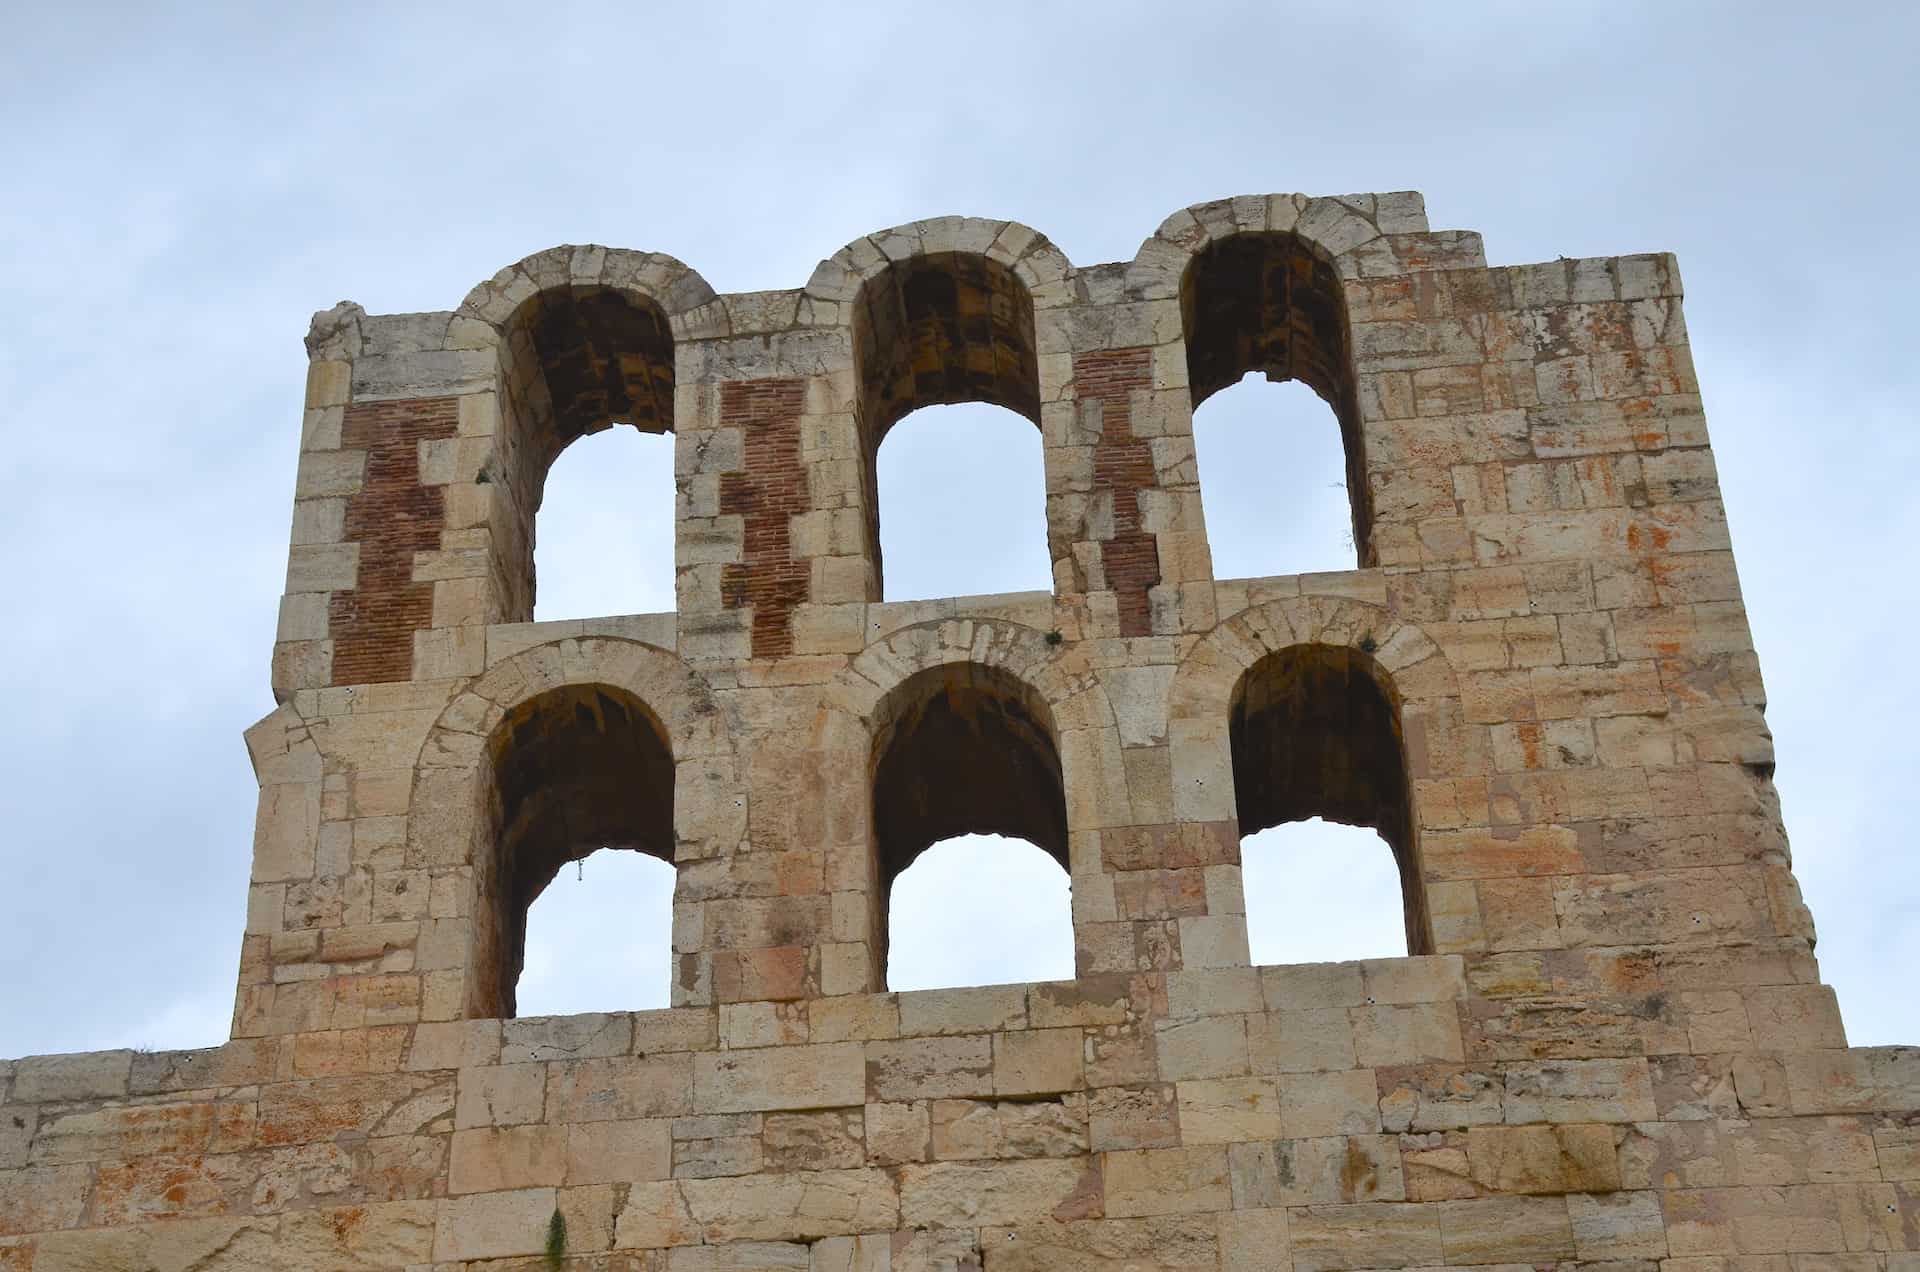 East side of the façade of the Odeon of Herodes Atticus